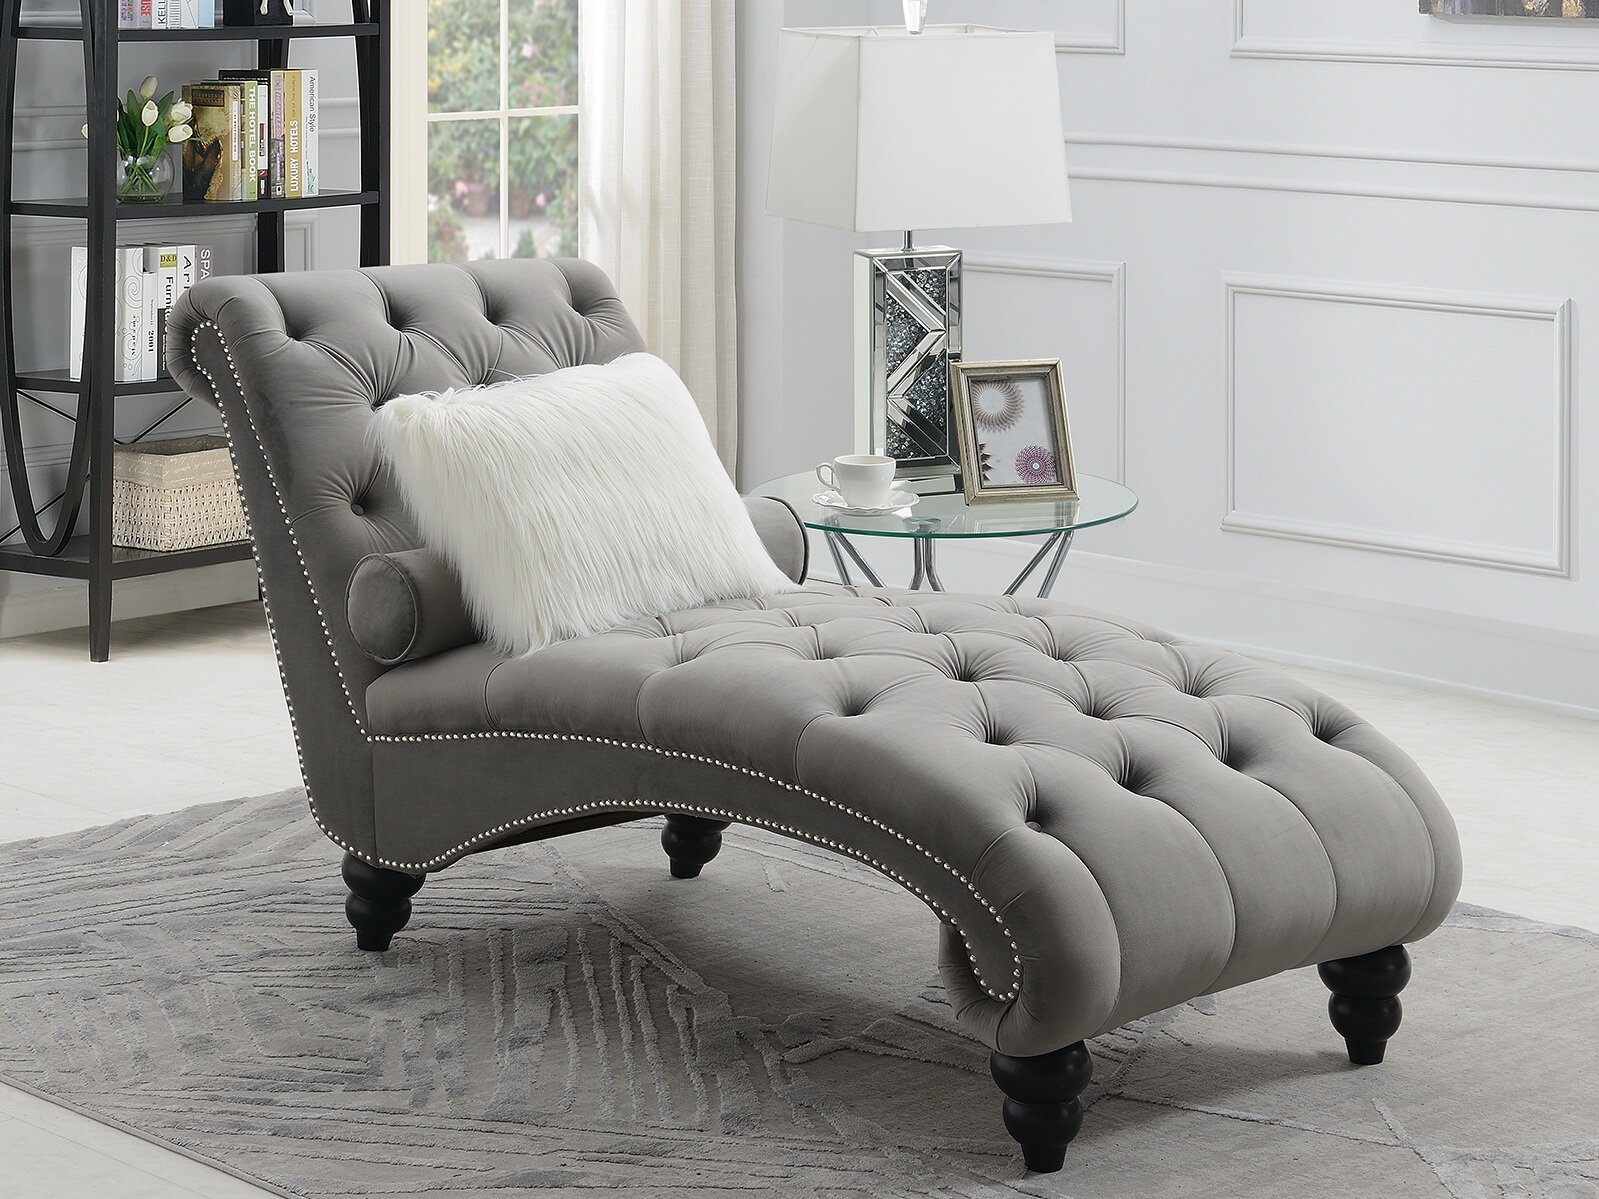 Trotta Upholstered Chaise Lounge